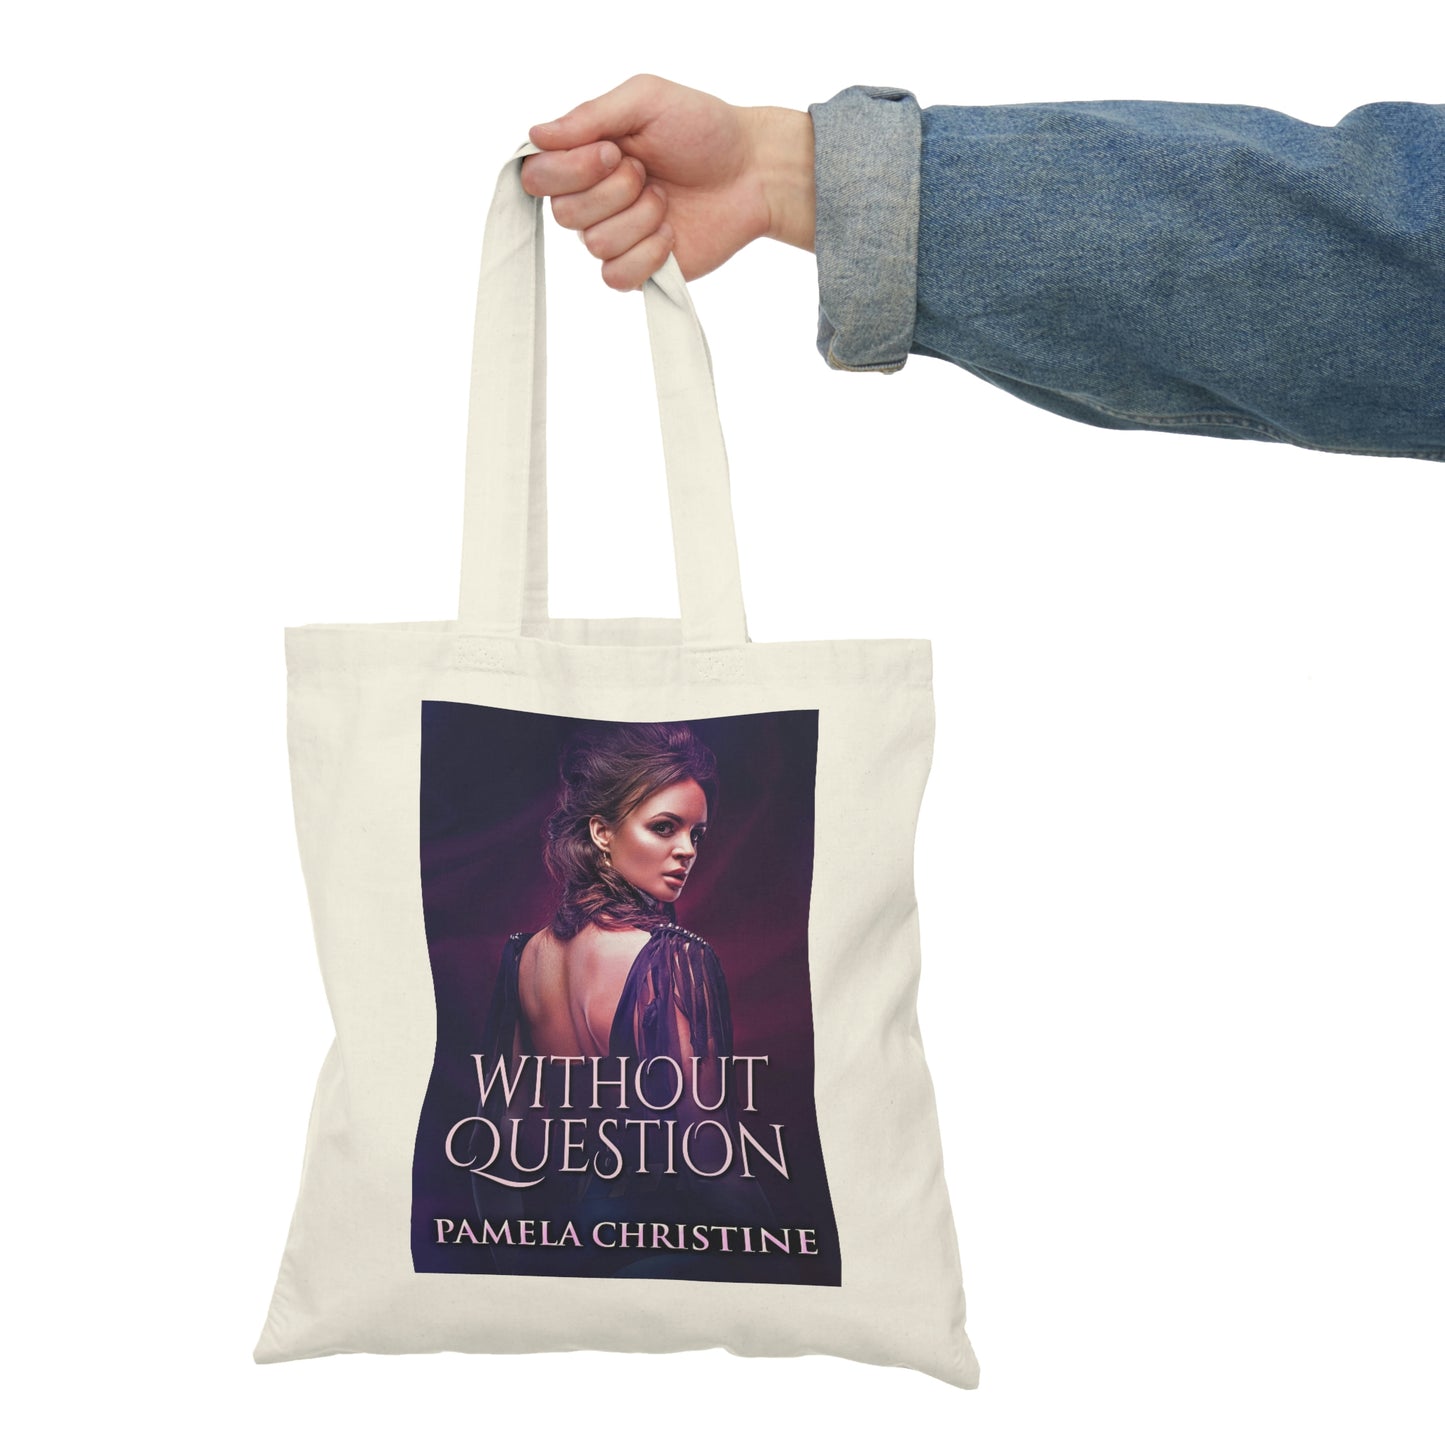 Without Question - Natural Tote Bag